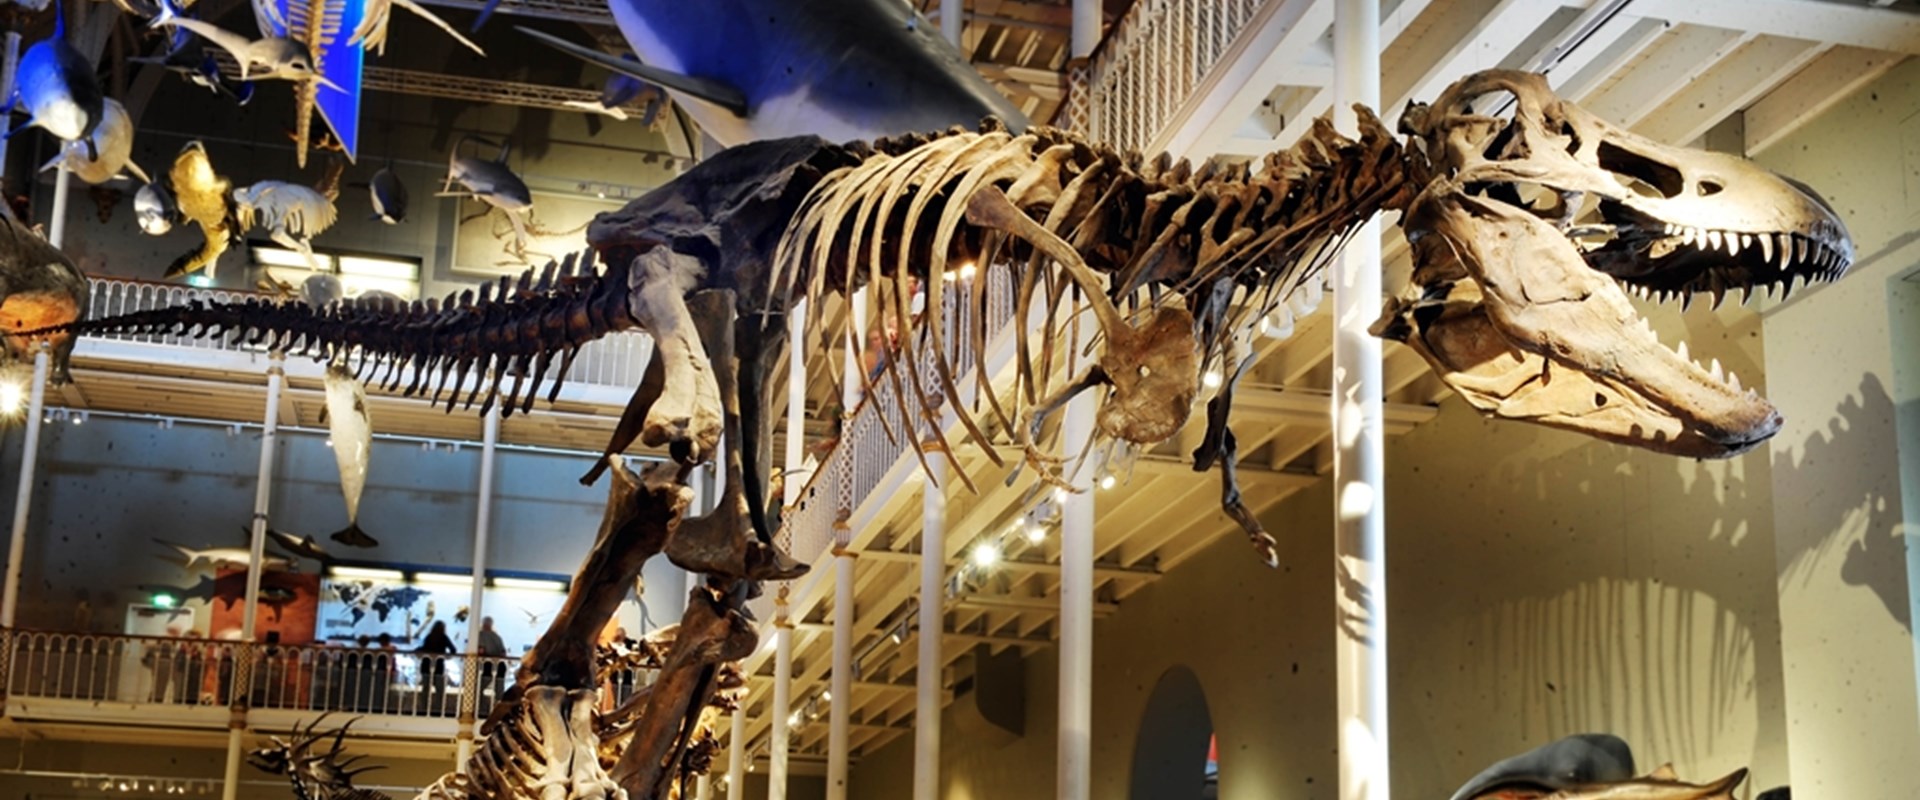 T.Rex In Animal World Gallery (C) National Museums Scotland